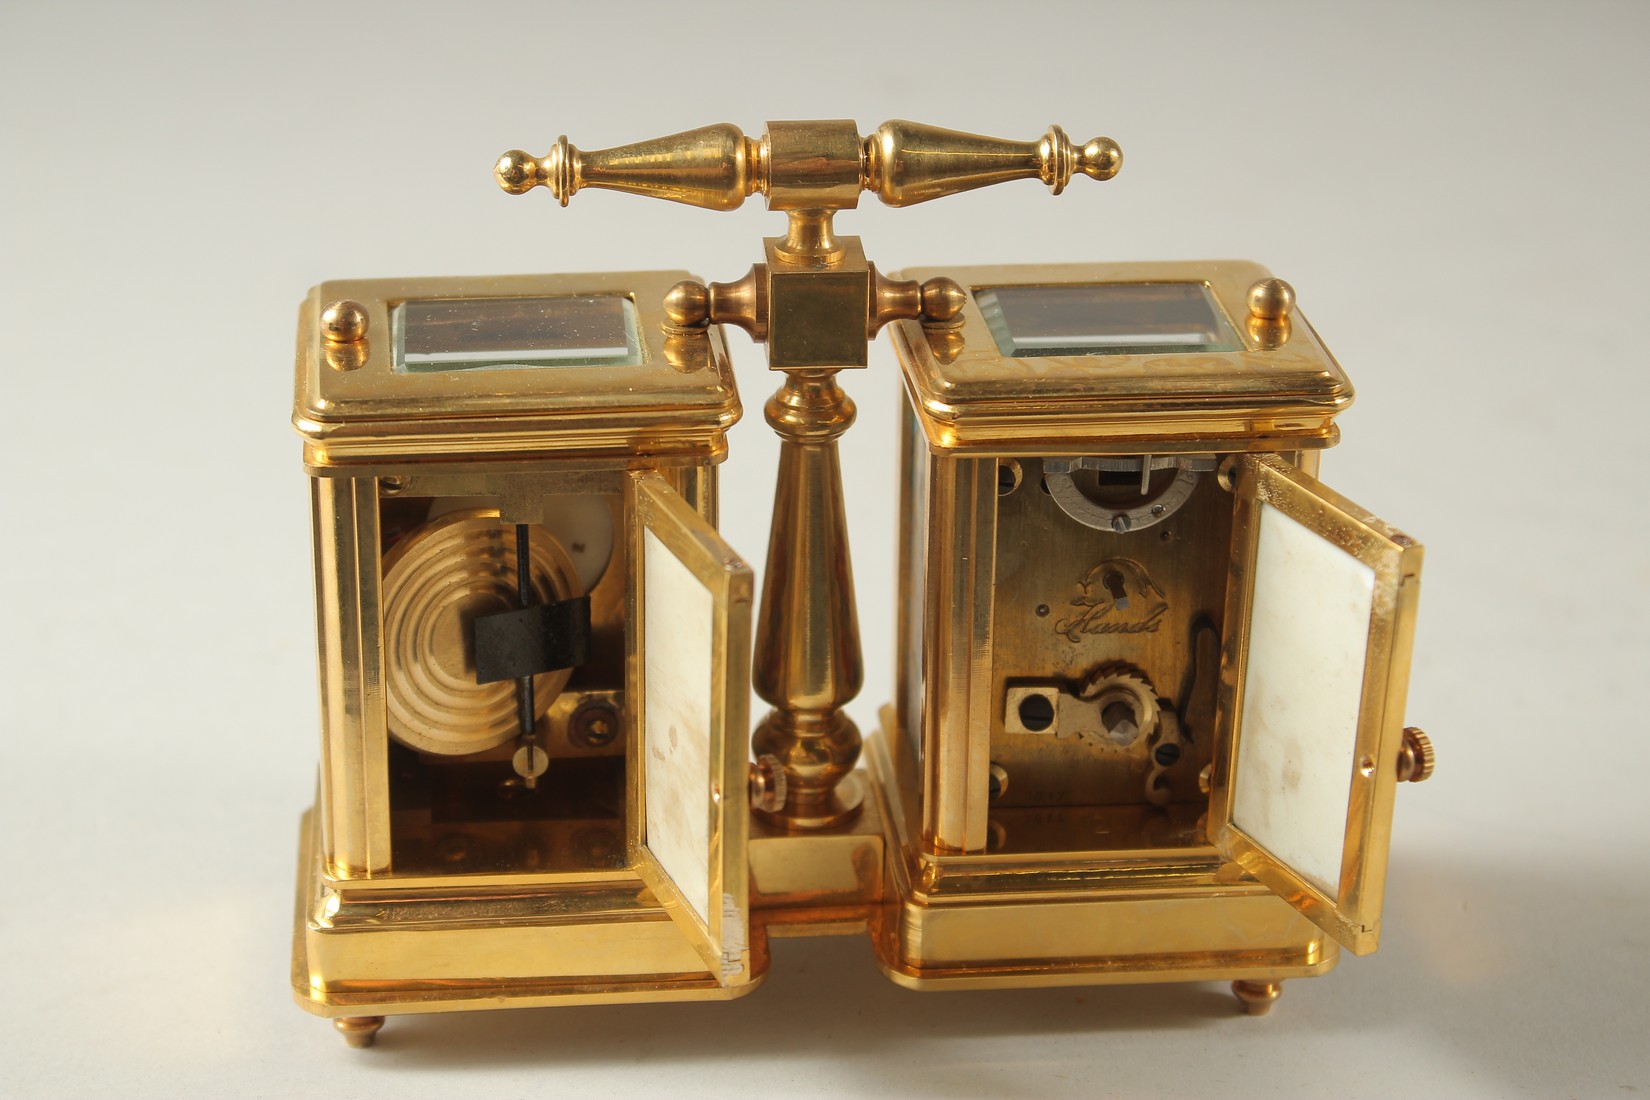 A SEVRES MODEL DOUBLE CARRIAGE CLOCK with porcelain panels and carrying handles. 10cms high. - Image 2 of 2